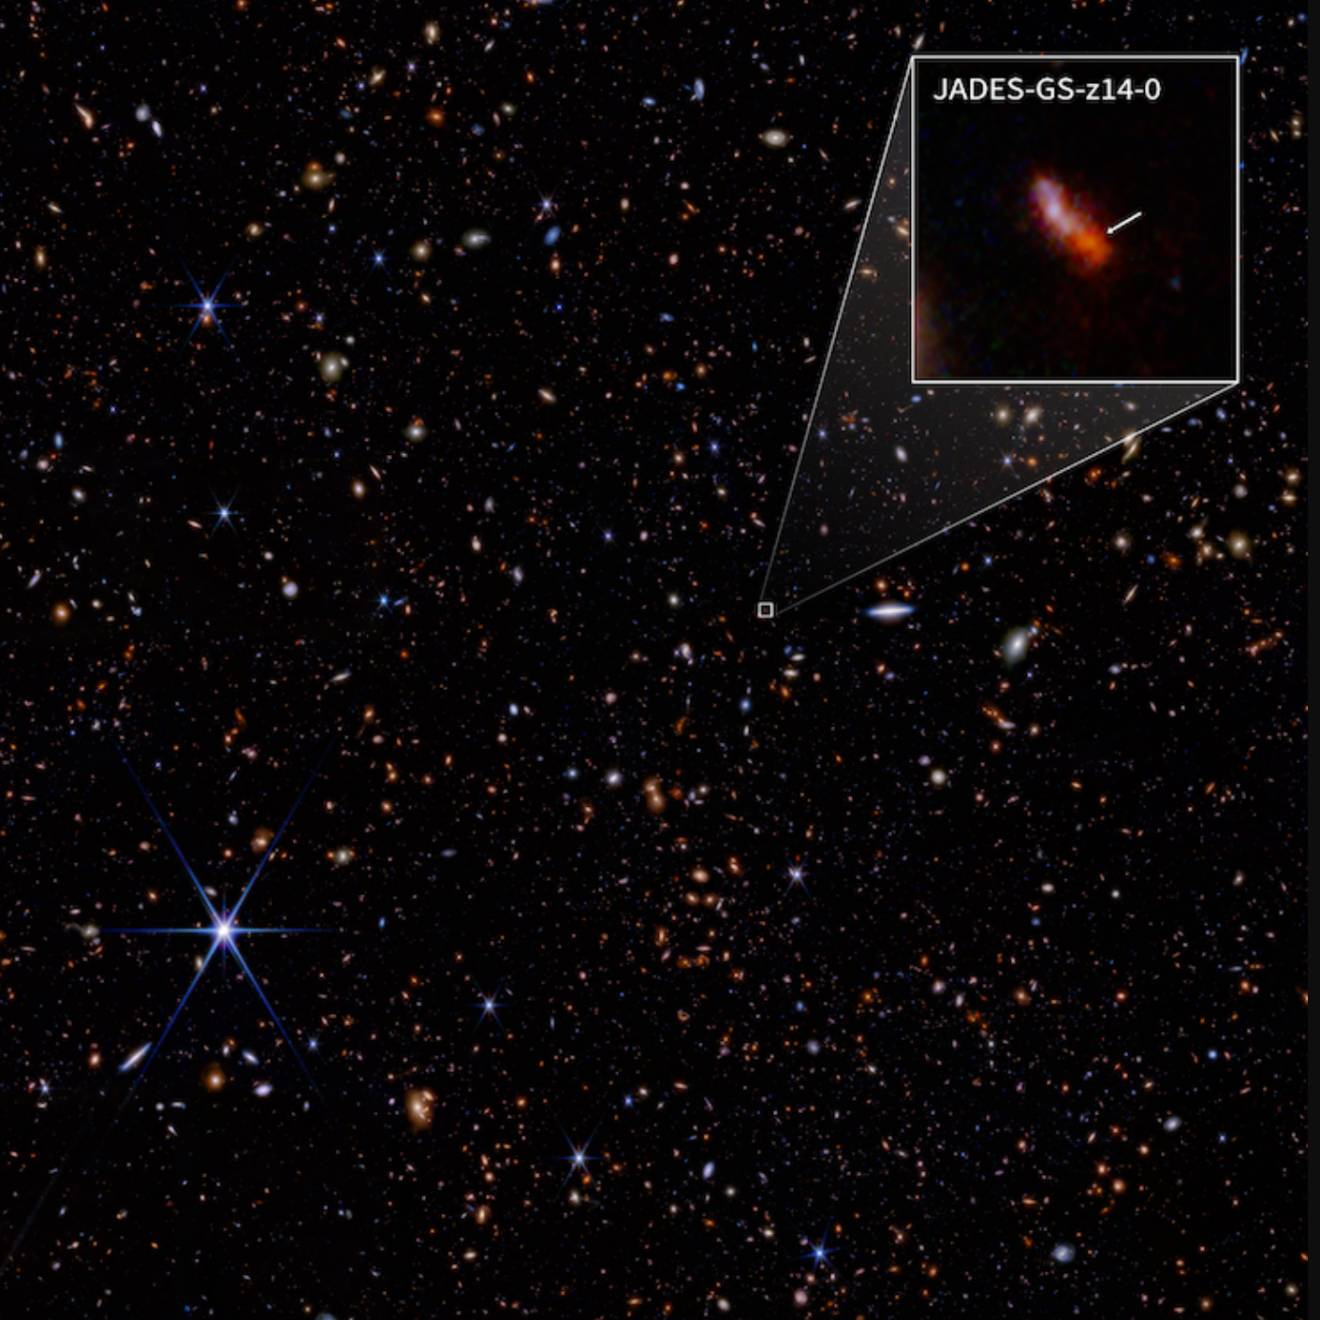 A view of stars with one box highlighting a specific galaxy, labelled JADES-GS-z14-0